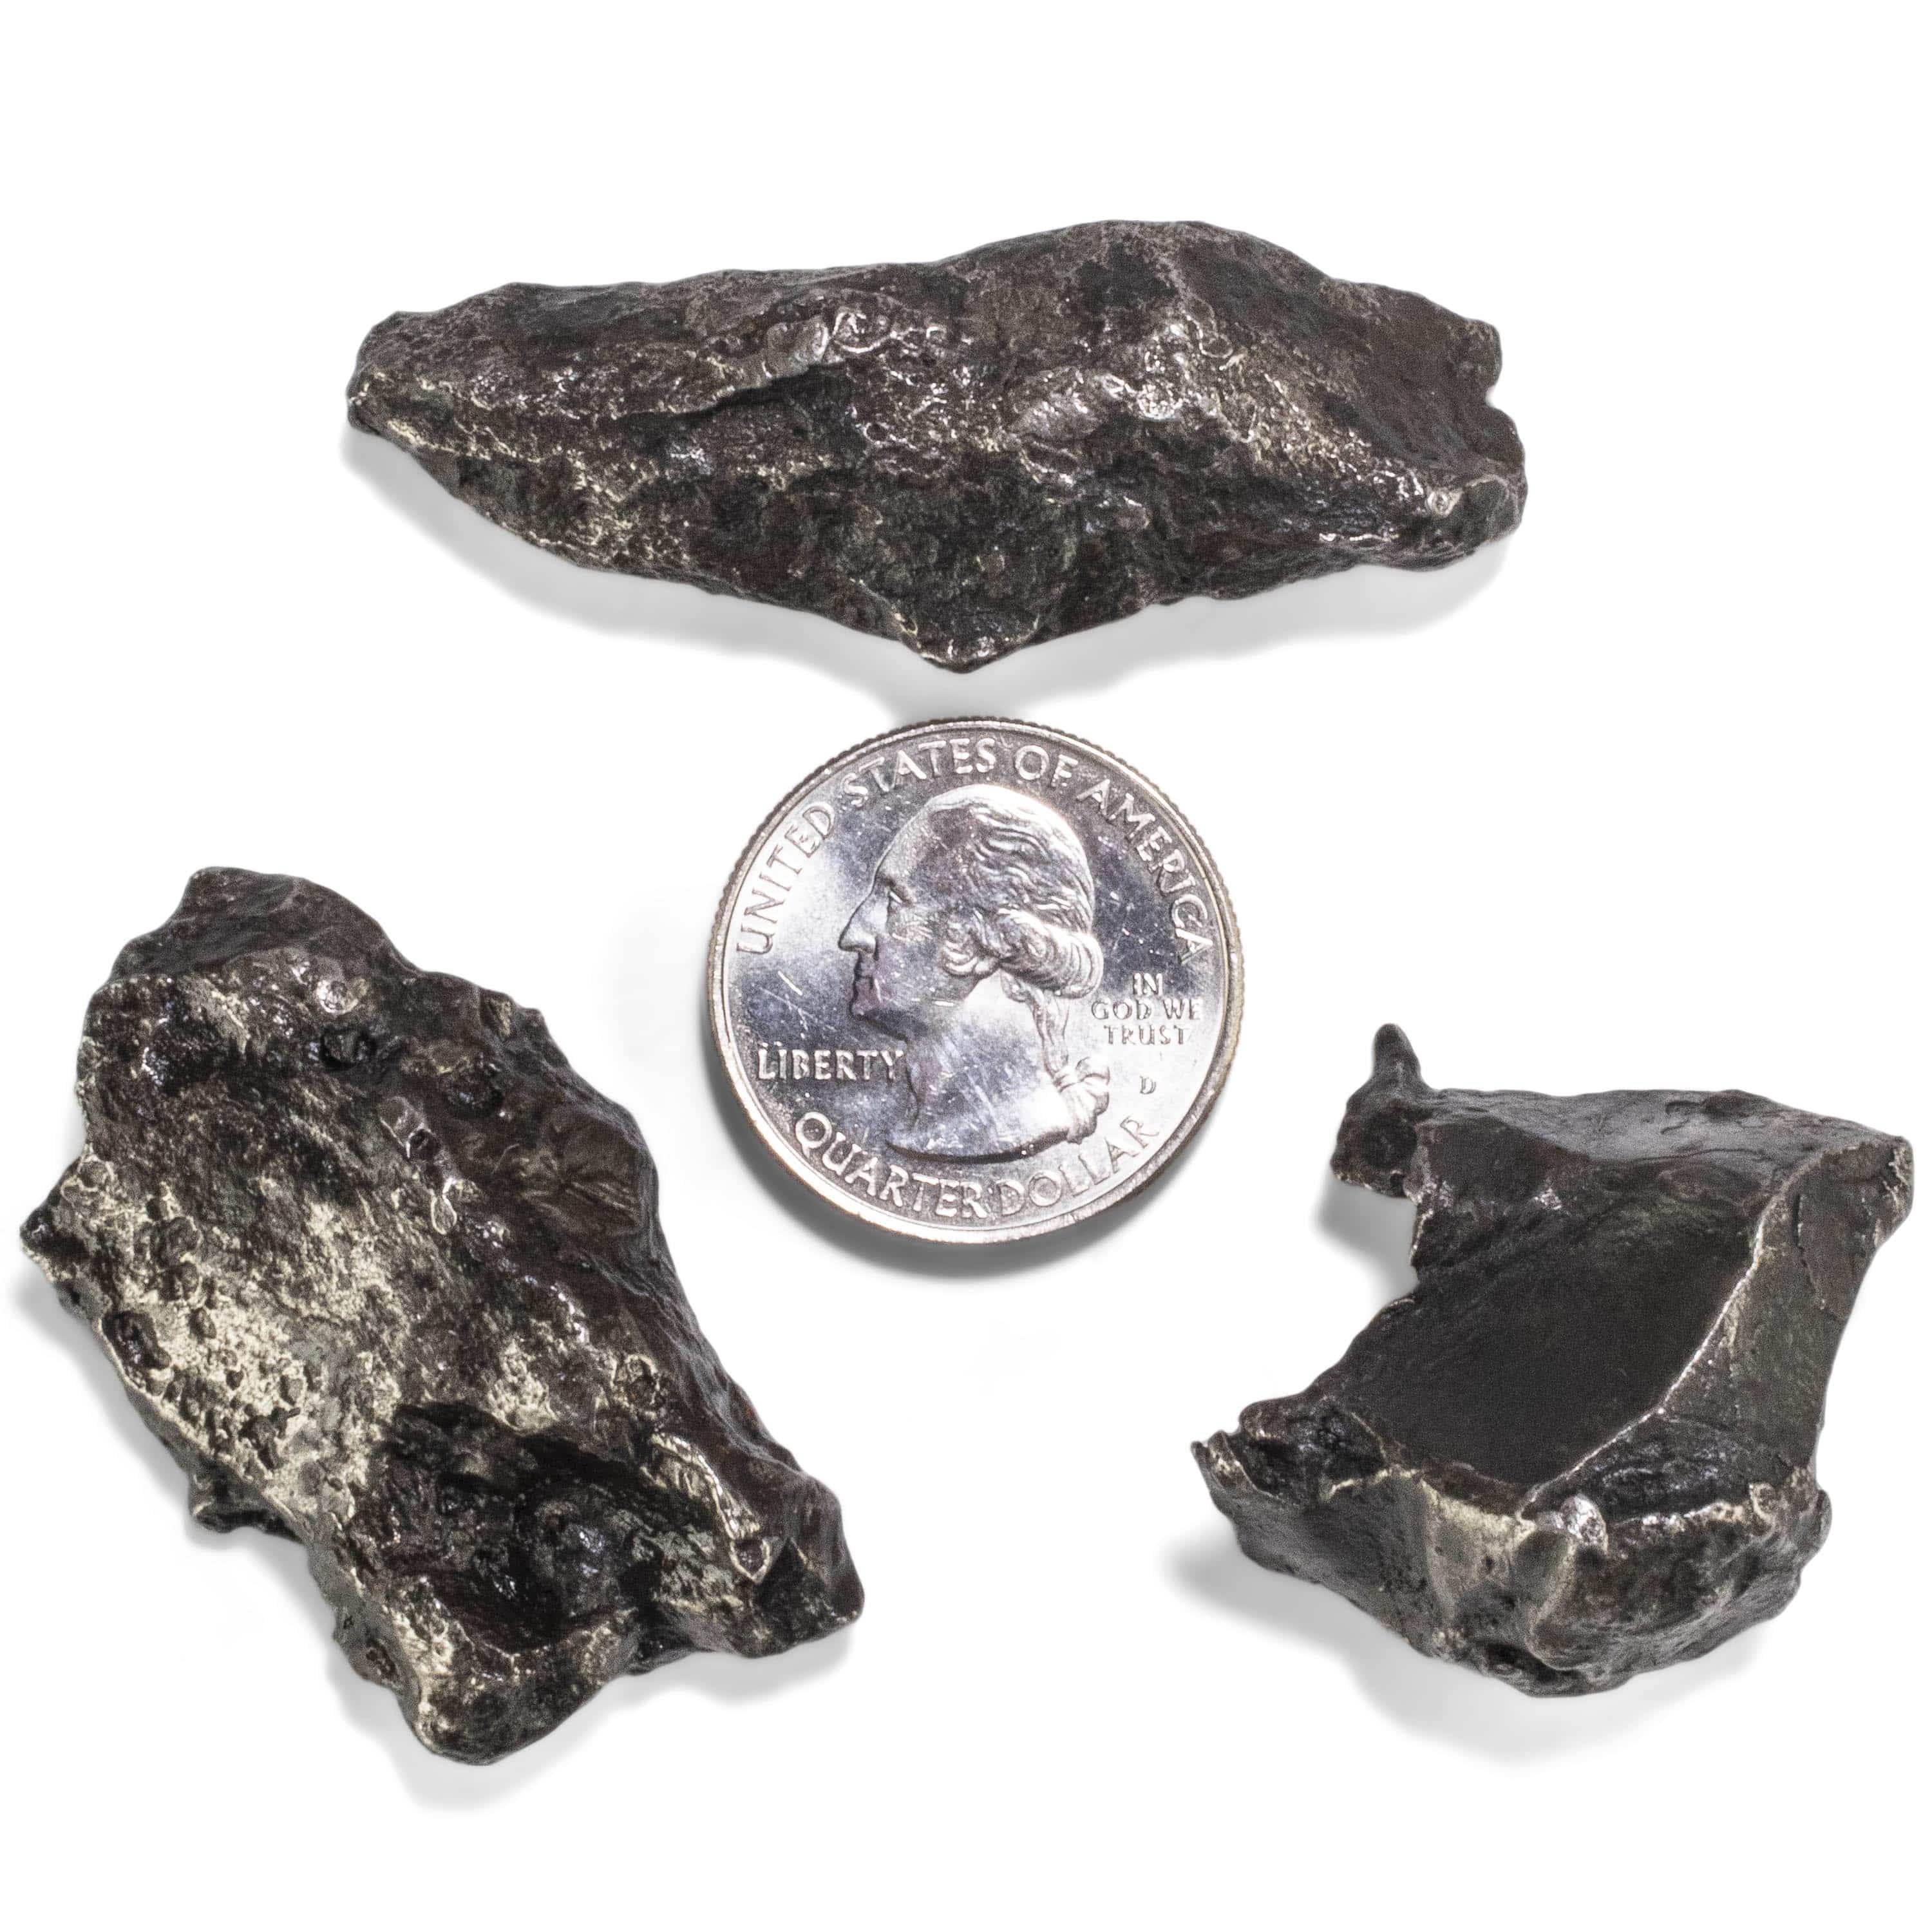 Kalifano Meteorites Sikhote-Alin Iron Meteorite discovered in Russia - 45 grams MTS1000